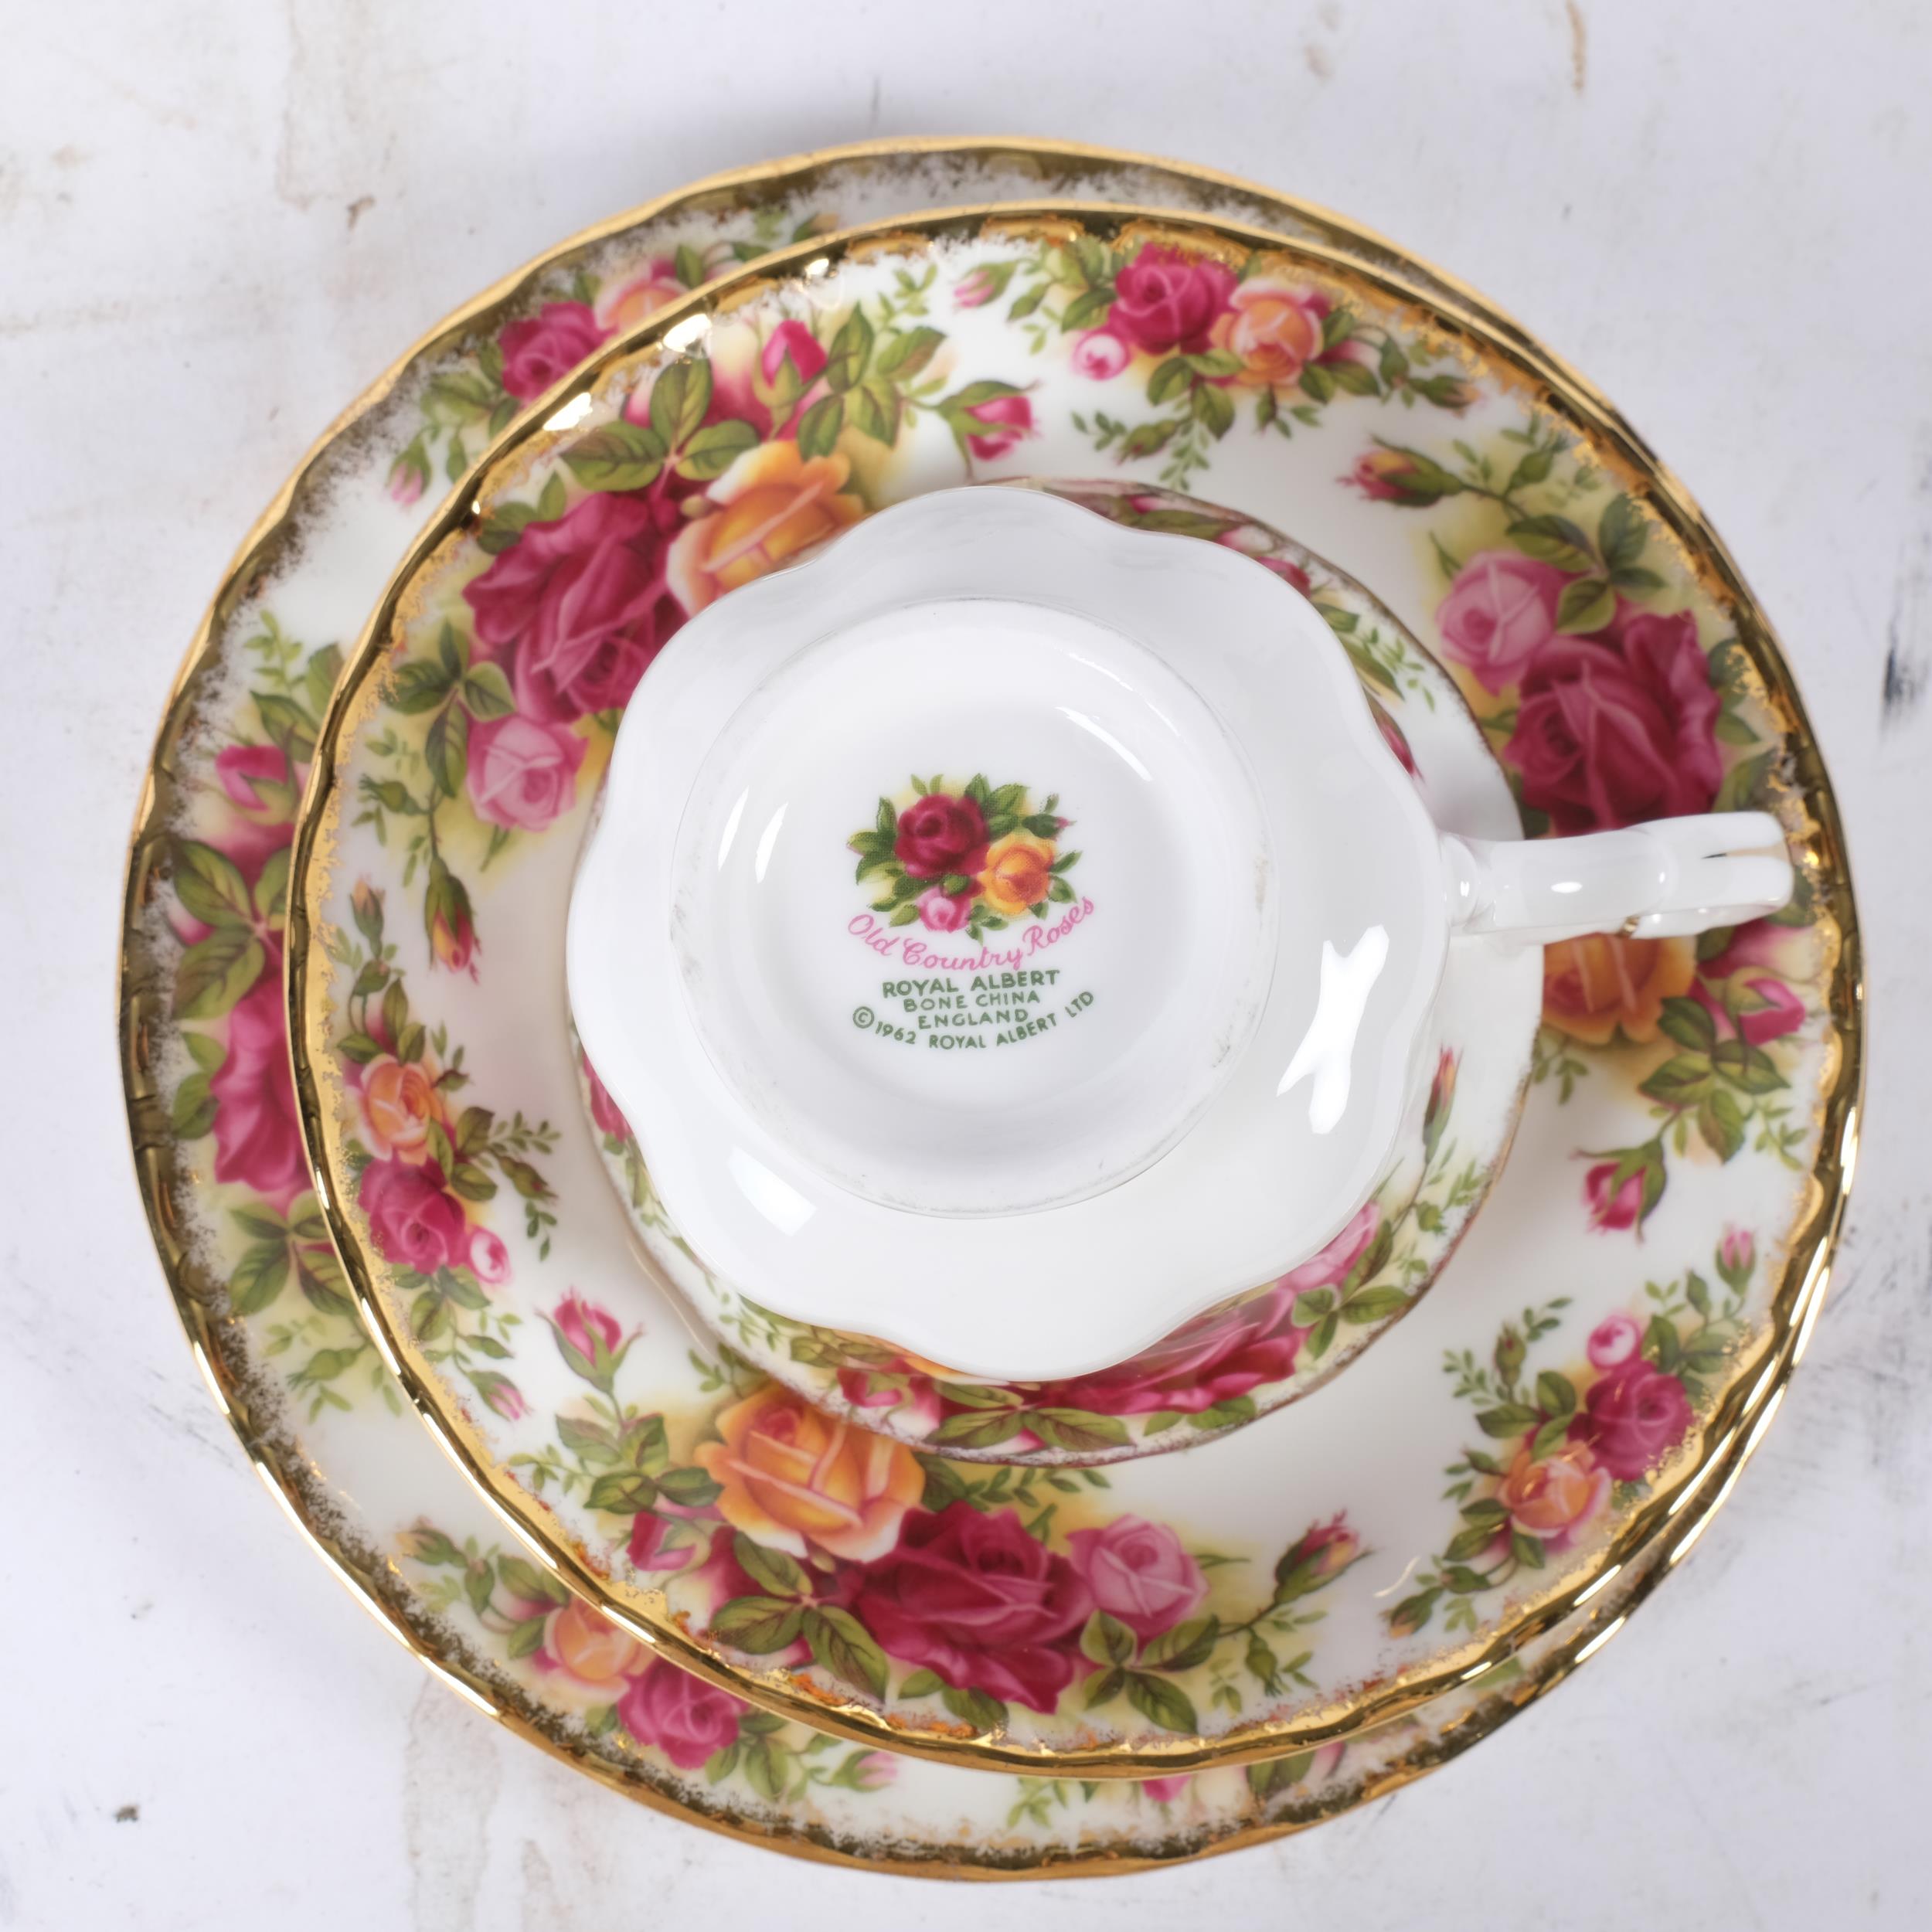 Royal Albert Old Country Roses, an 8-piece tea service, including teapot, cups, saucers and side - Image 2 of 2